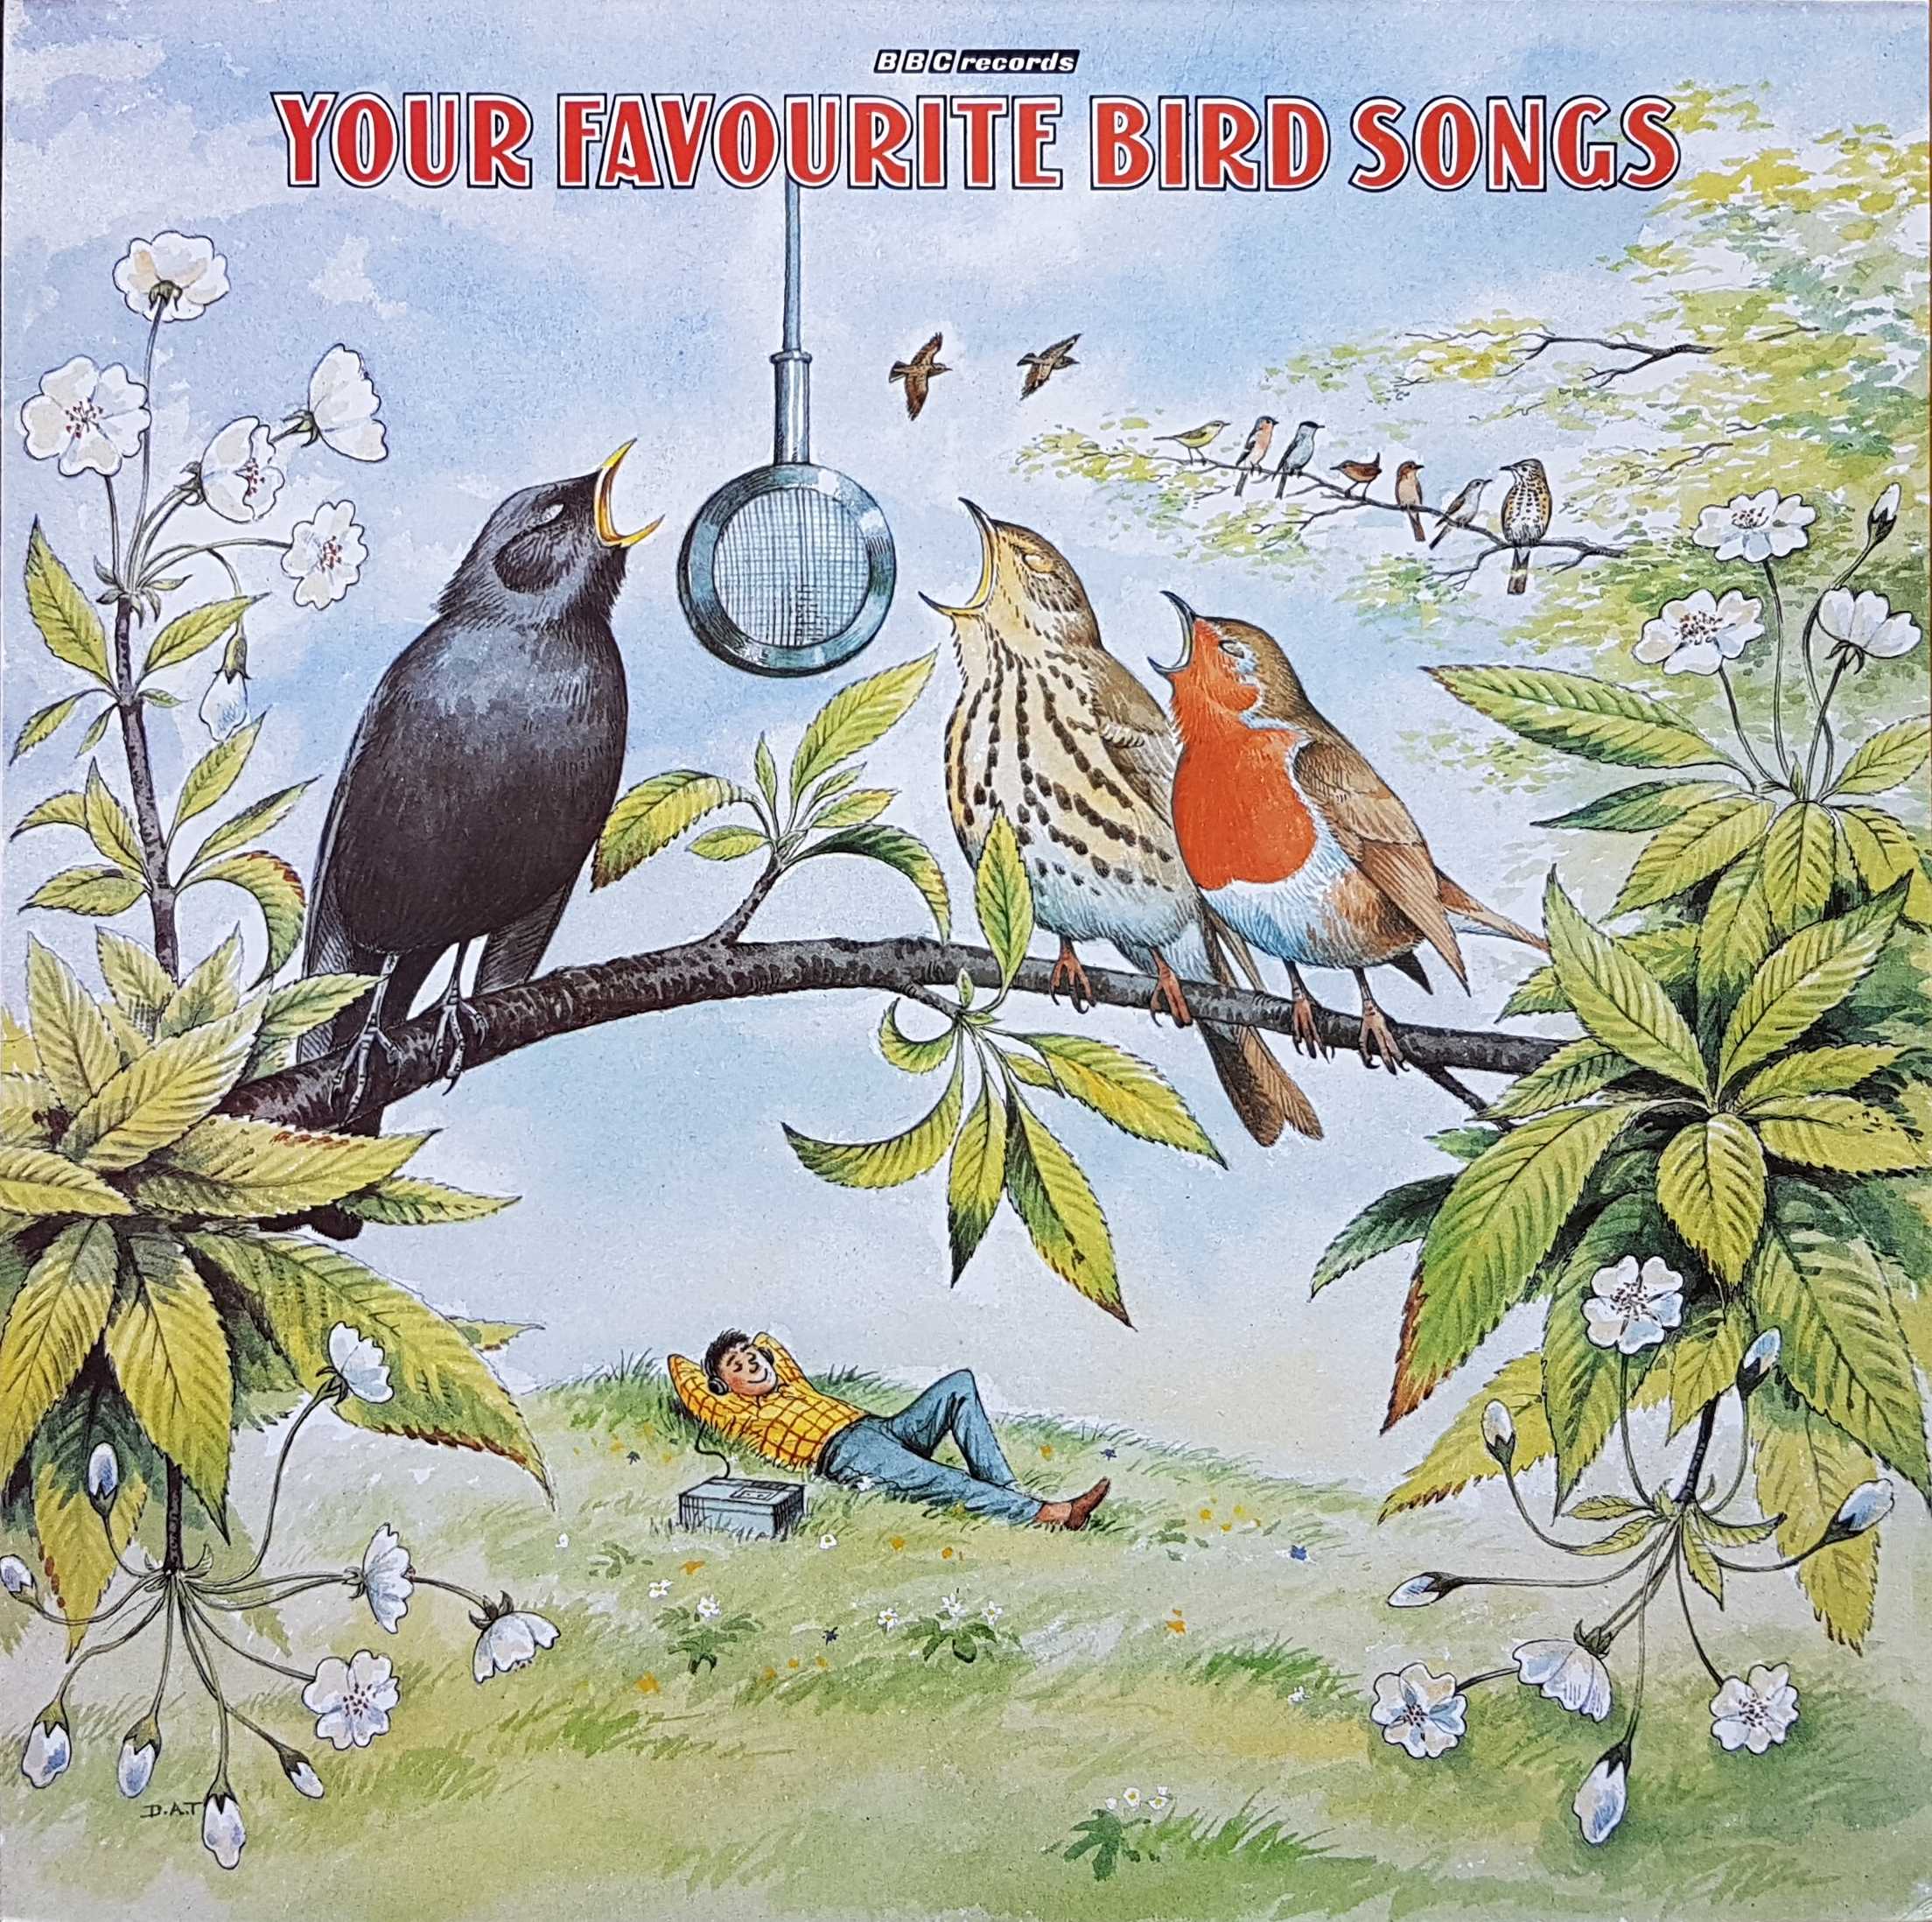 Picture of REC 511 Your favourite bird songs by artist Various from the BBC albums - Records and Tapes library